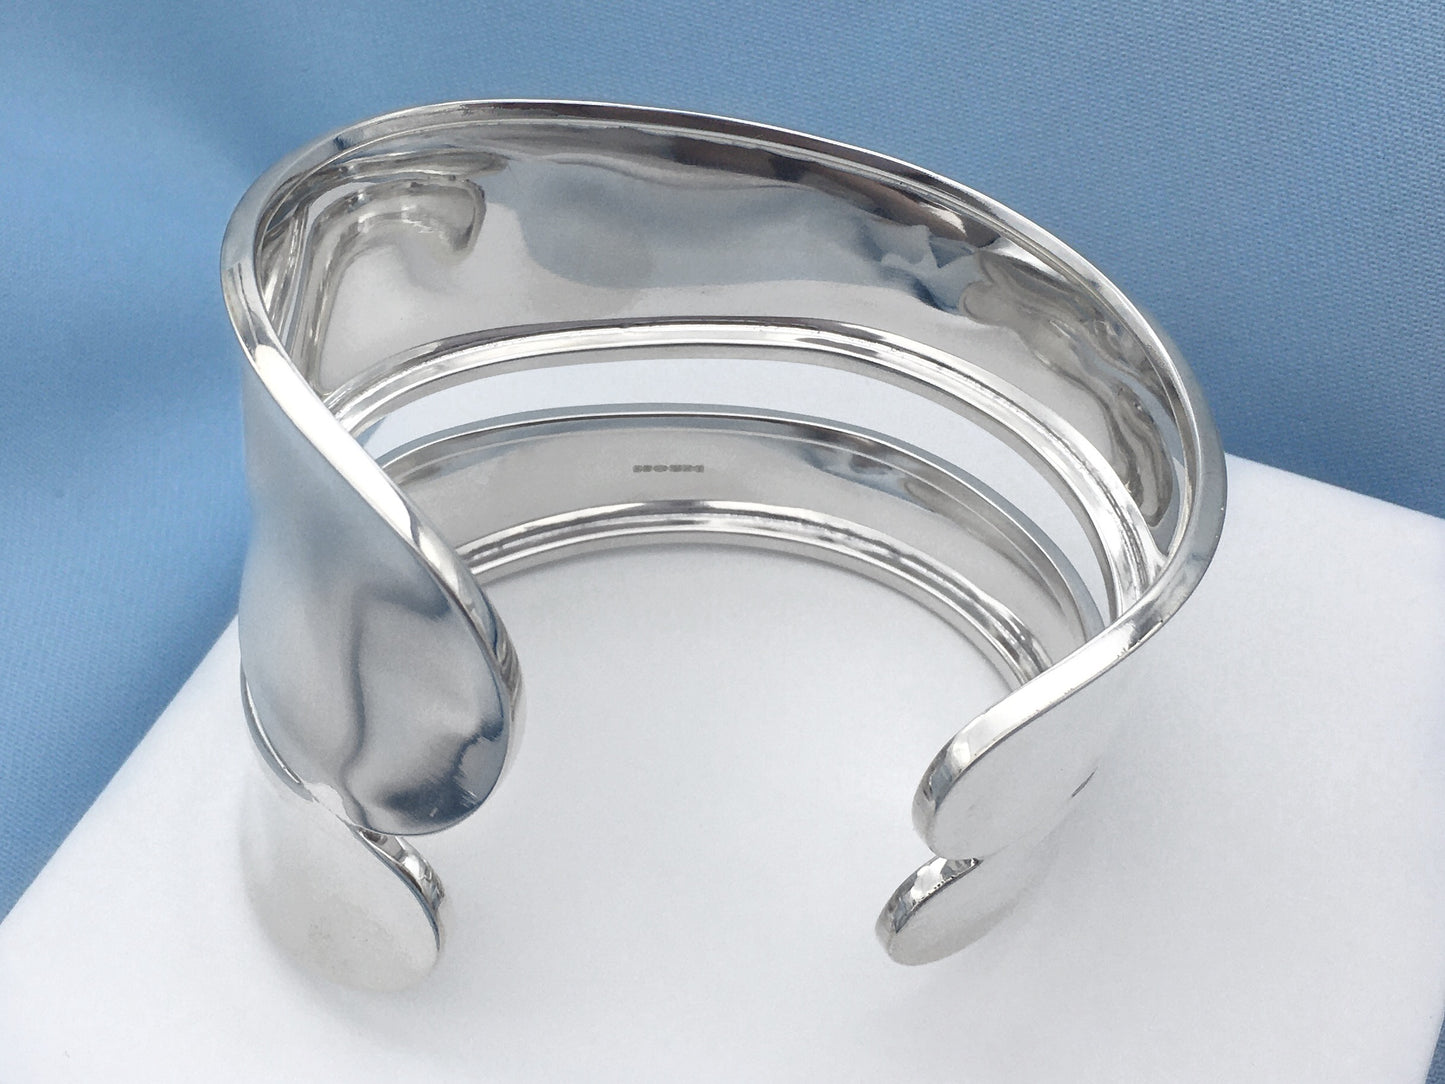 Smile Bangle Large Statement Sterling Silver Cuff